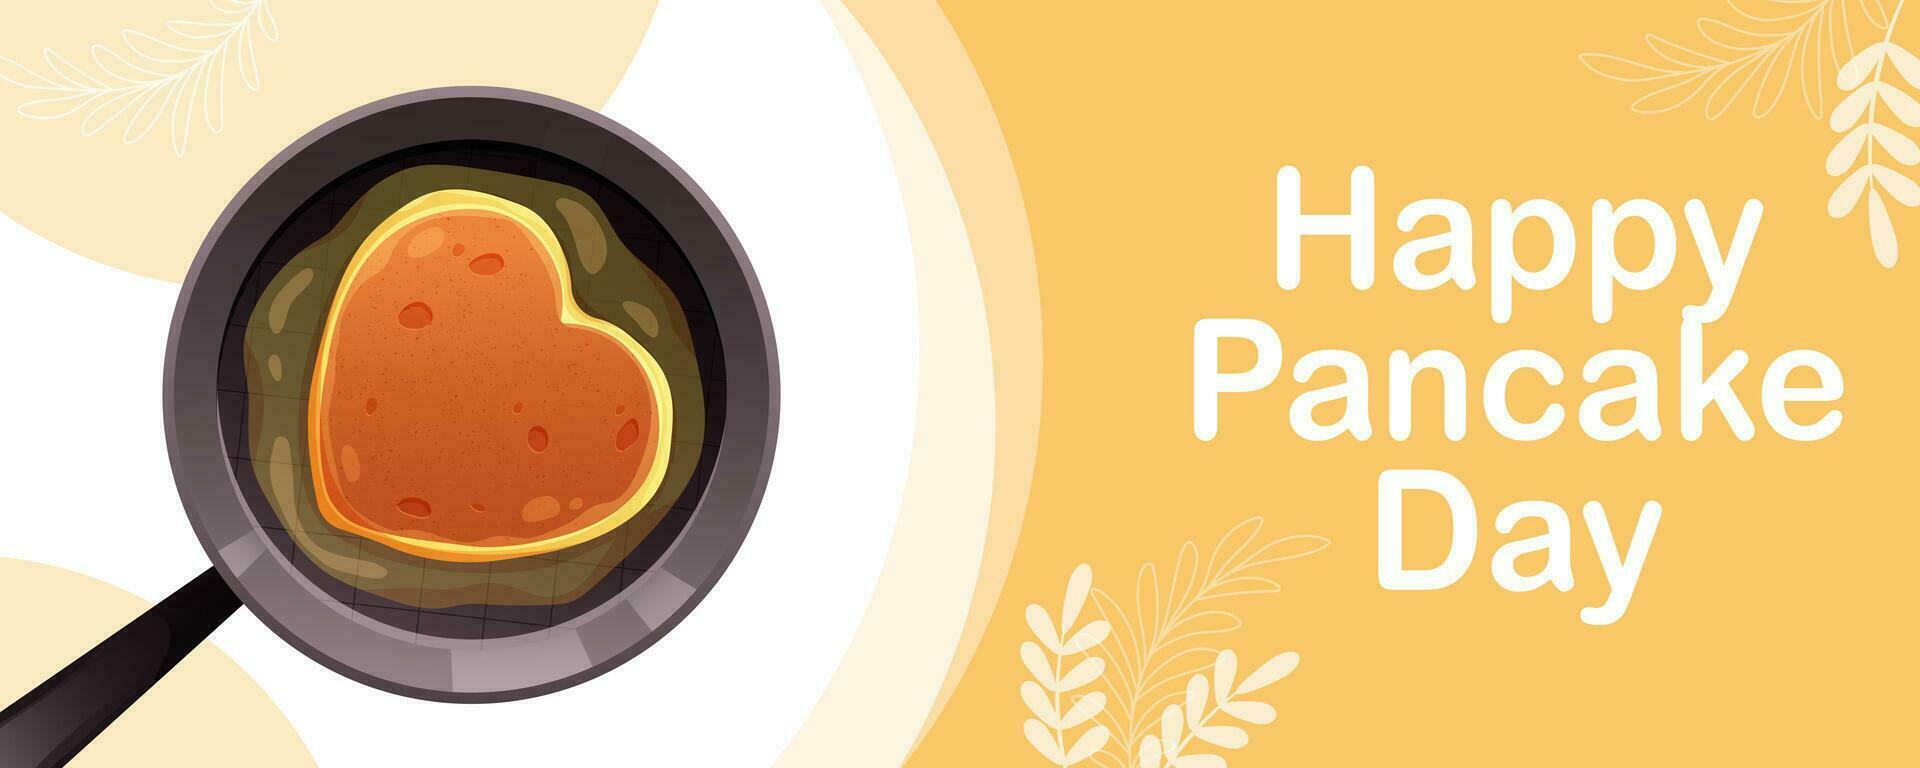 Pan with heart pancake and butter on yellow background and text Happy Pancake Day. Greeting, advertising banner, postcard vector